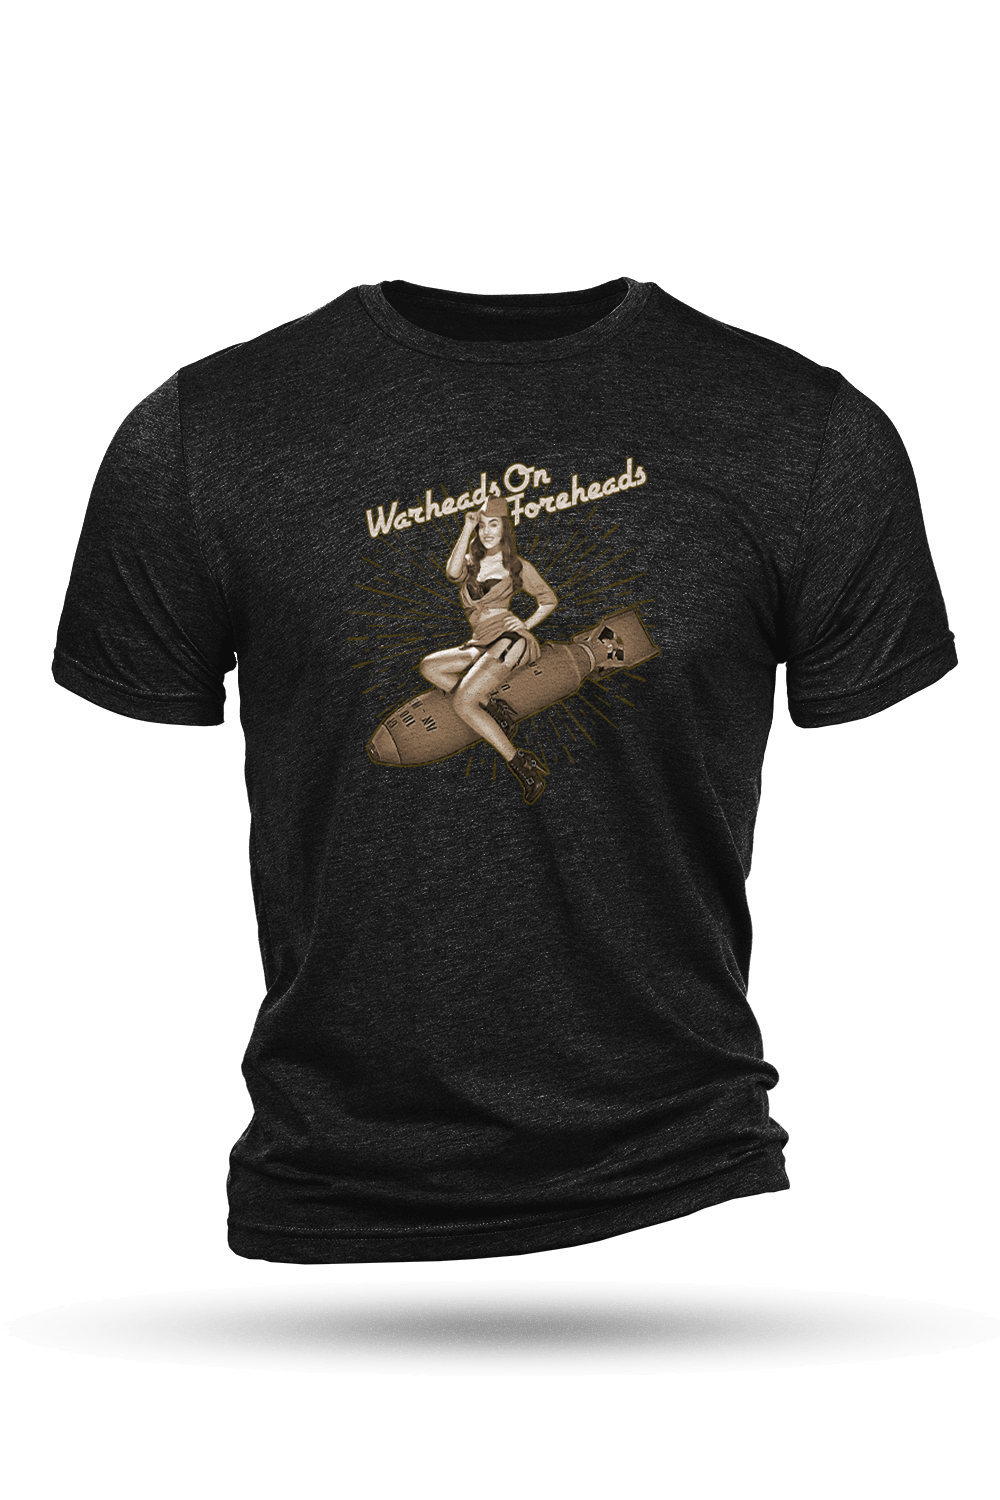 Enlisted 9 - Tri-Blend T-Shirt - Warheads on Foreheads